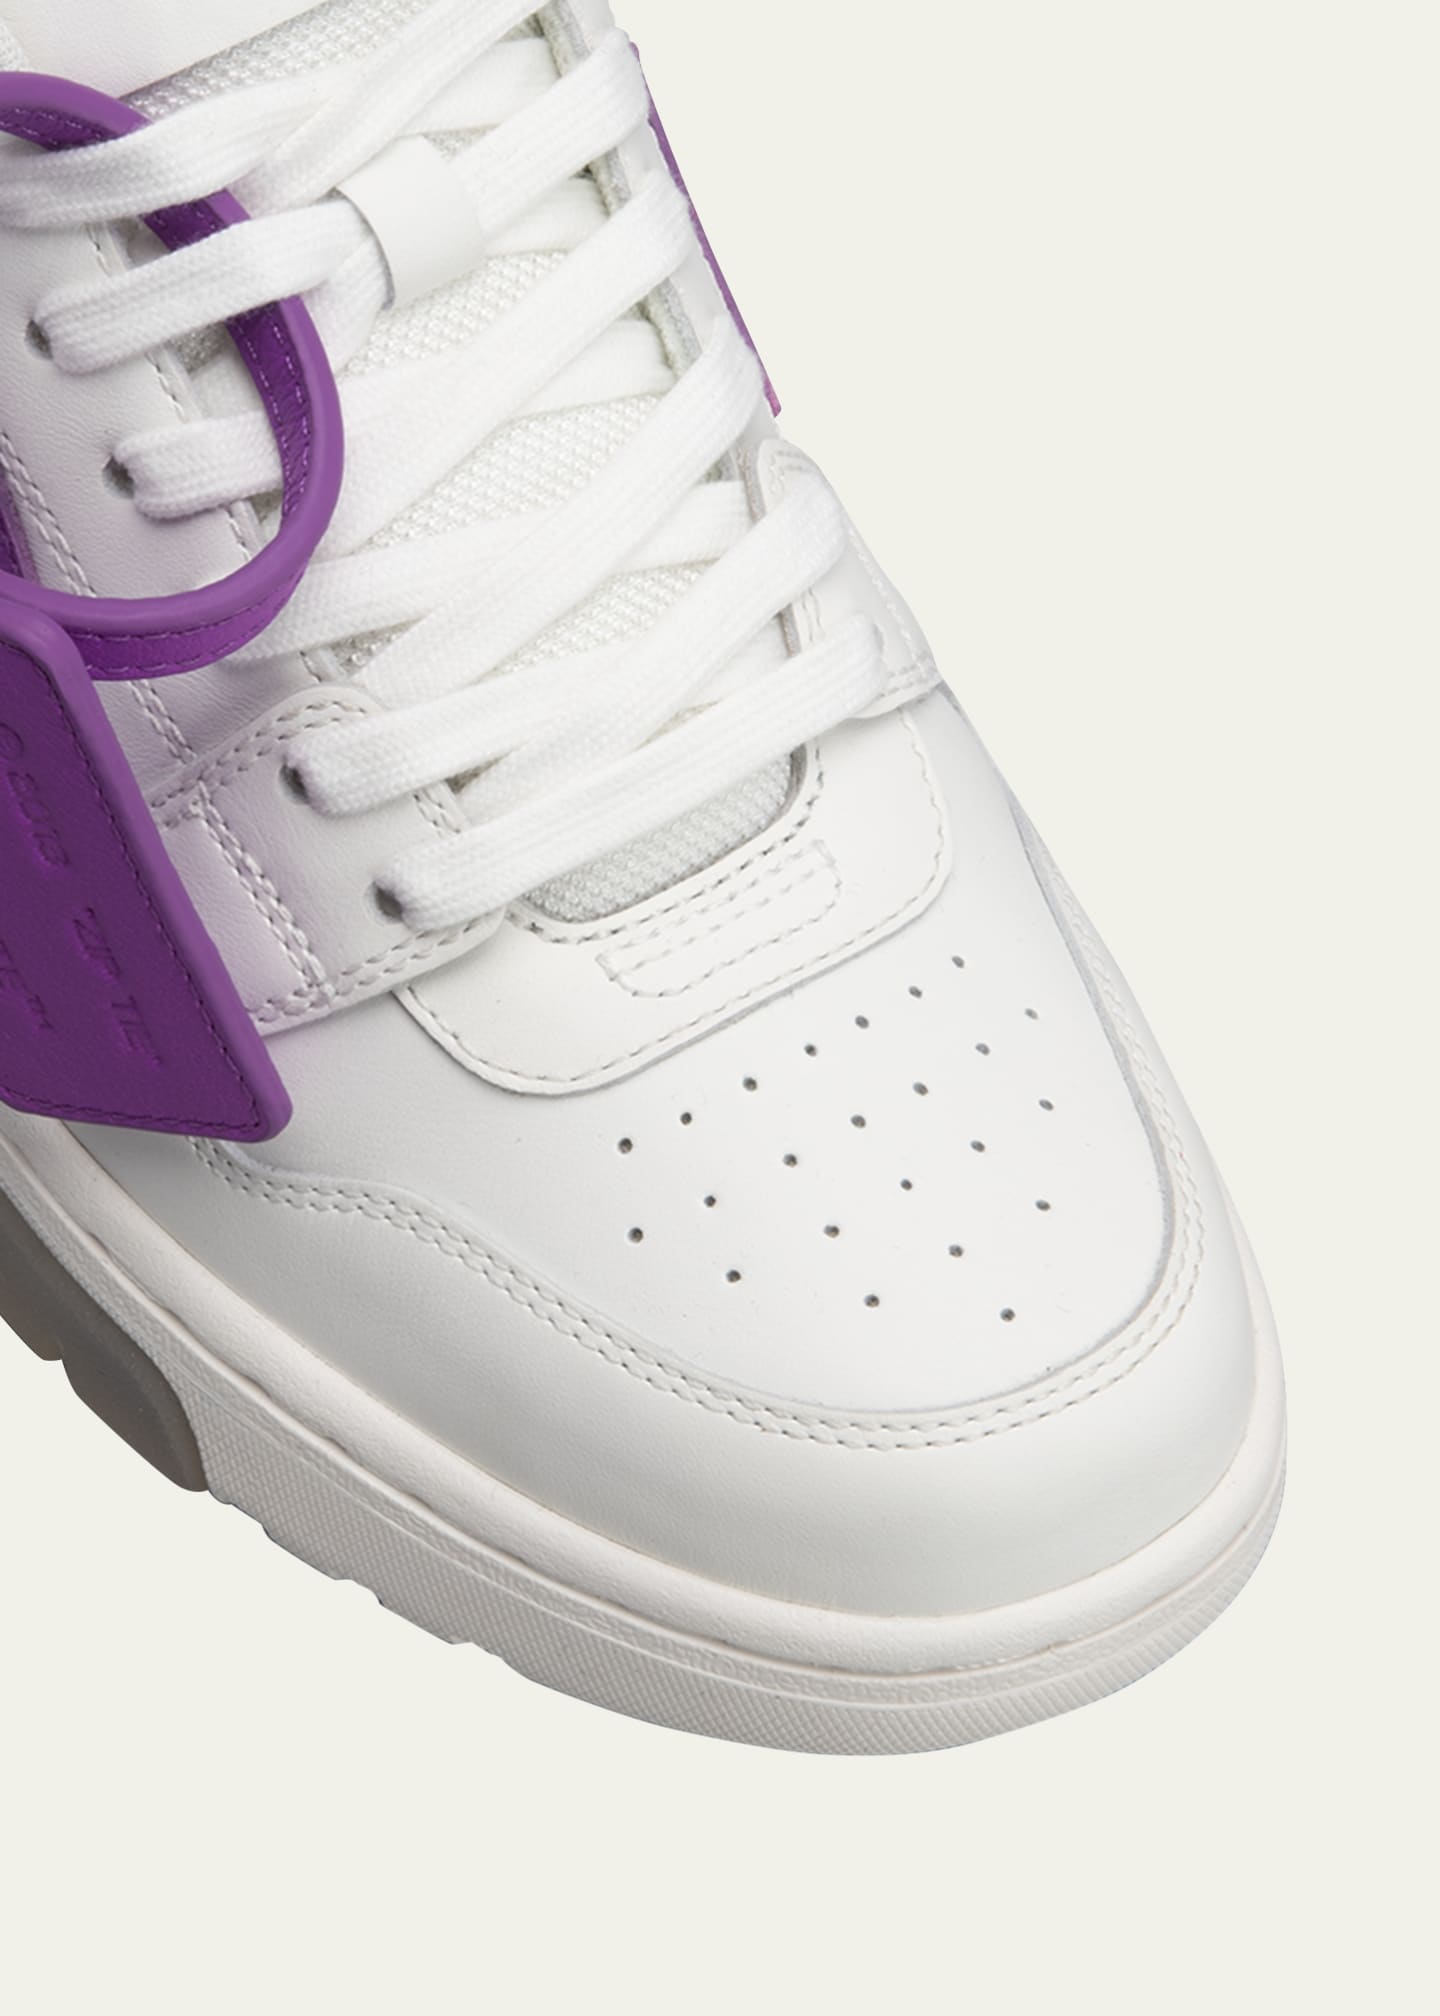 Off-White Out of Office Arrow Leather Trainer Sneakers - Bergdorf Goodman